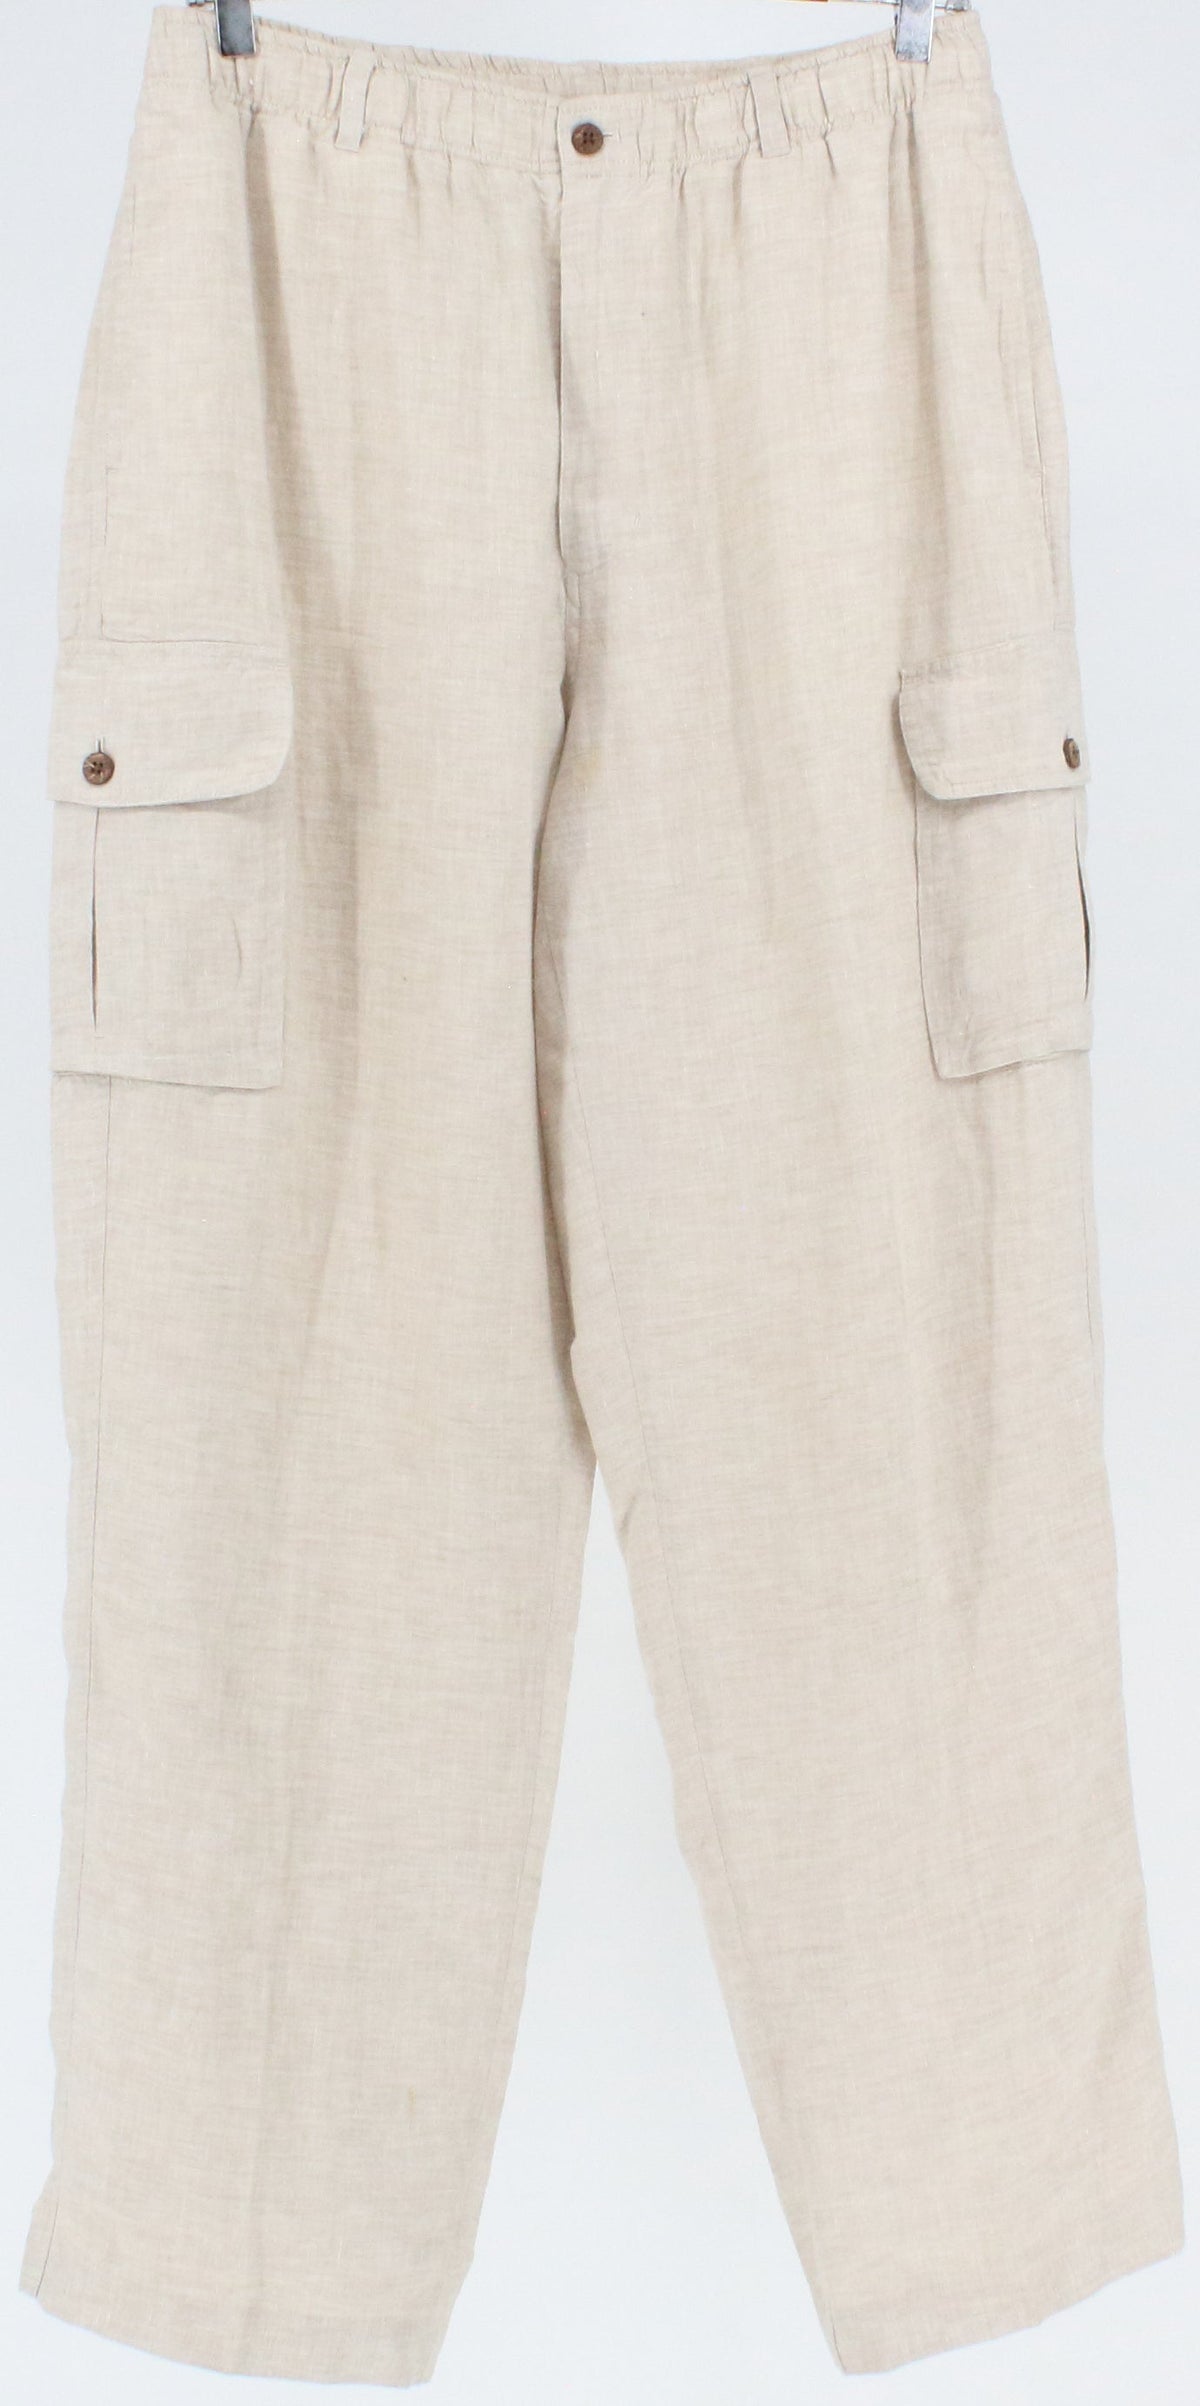 Caribbean Relaxed Fit Beige Pockets Linen Pants